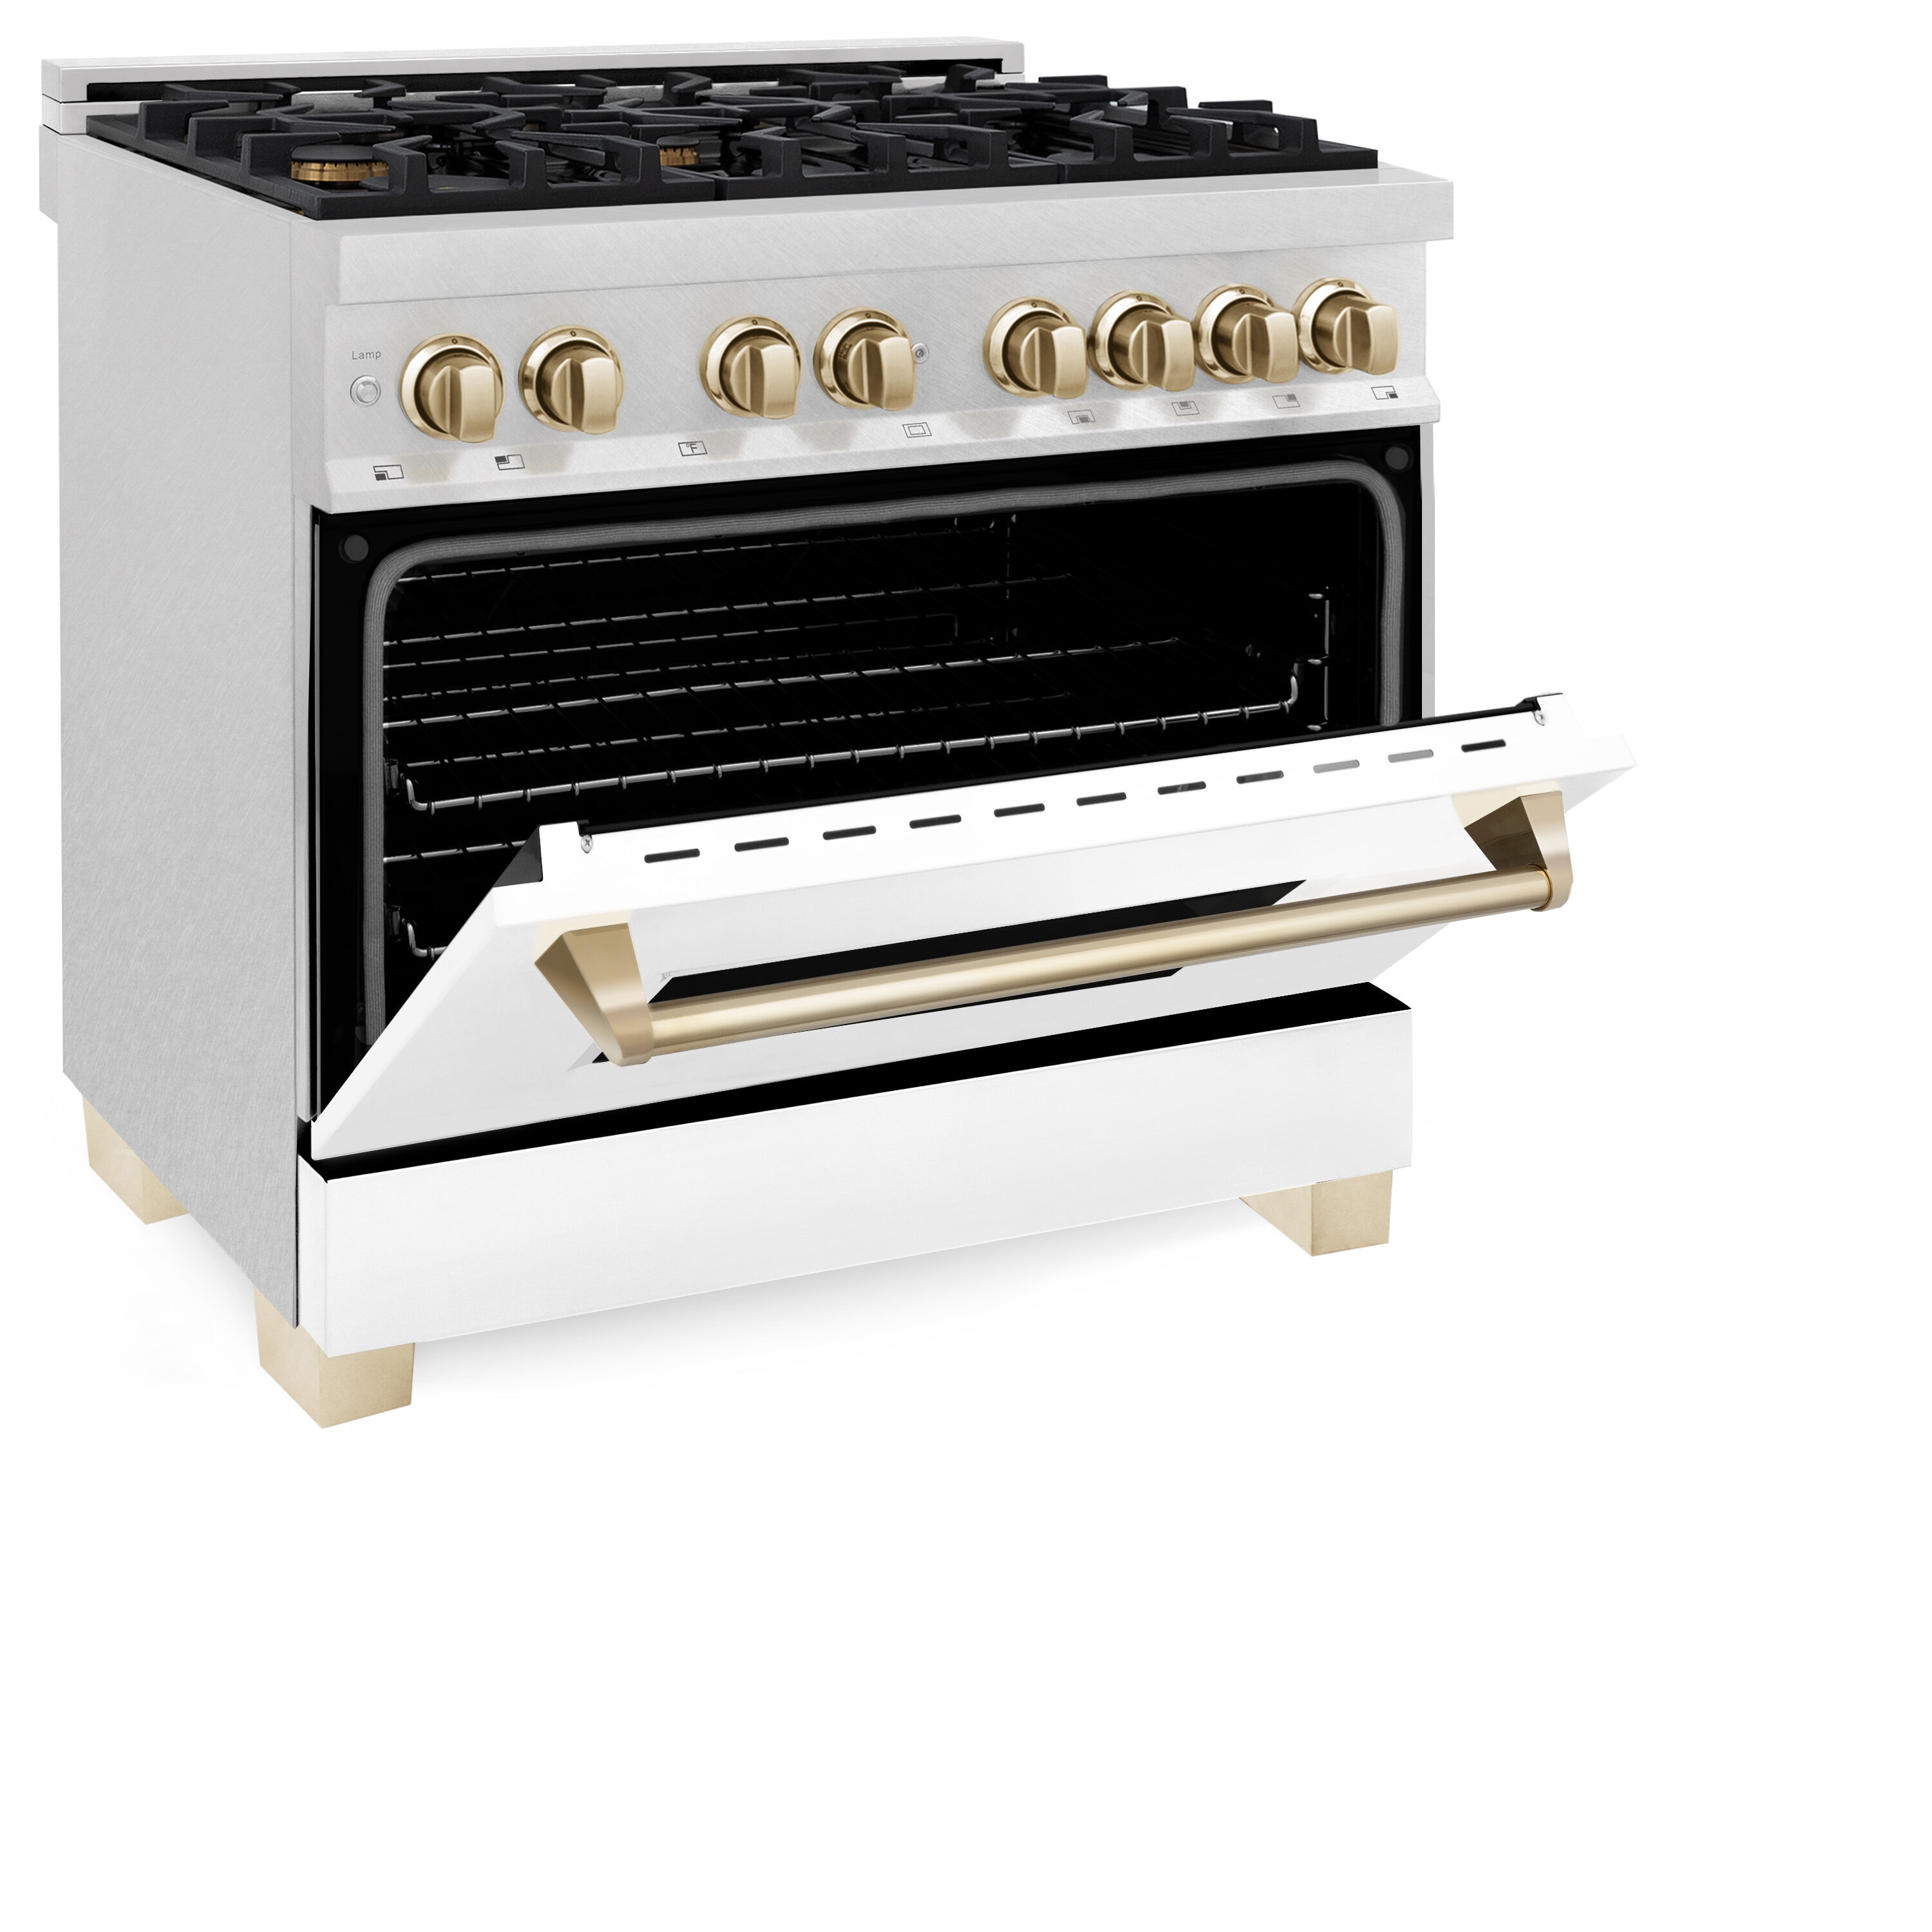 ZLINE Autograph Edition 48 6.0 Cu. ft. Dual Fuel Range in DuraSnow Stainless Steel with White Matte Door and Gold Accents (RASZ-WM-48-G)